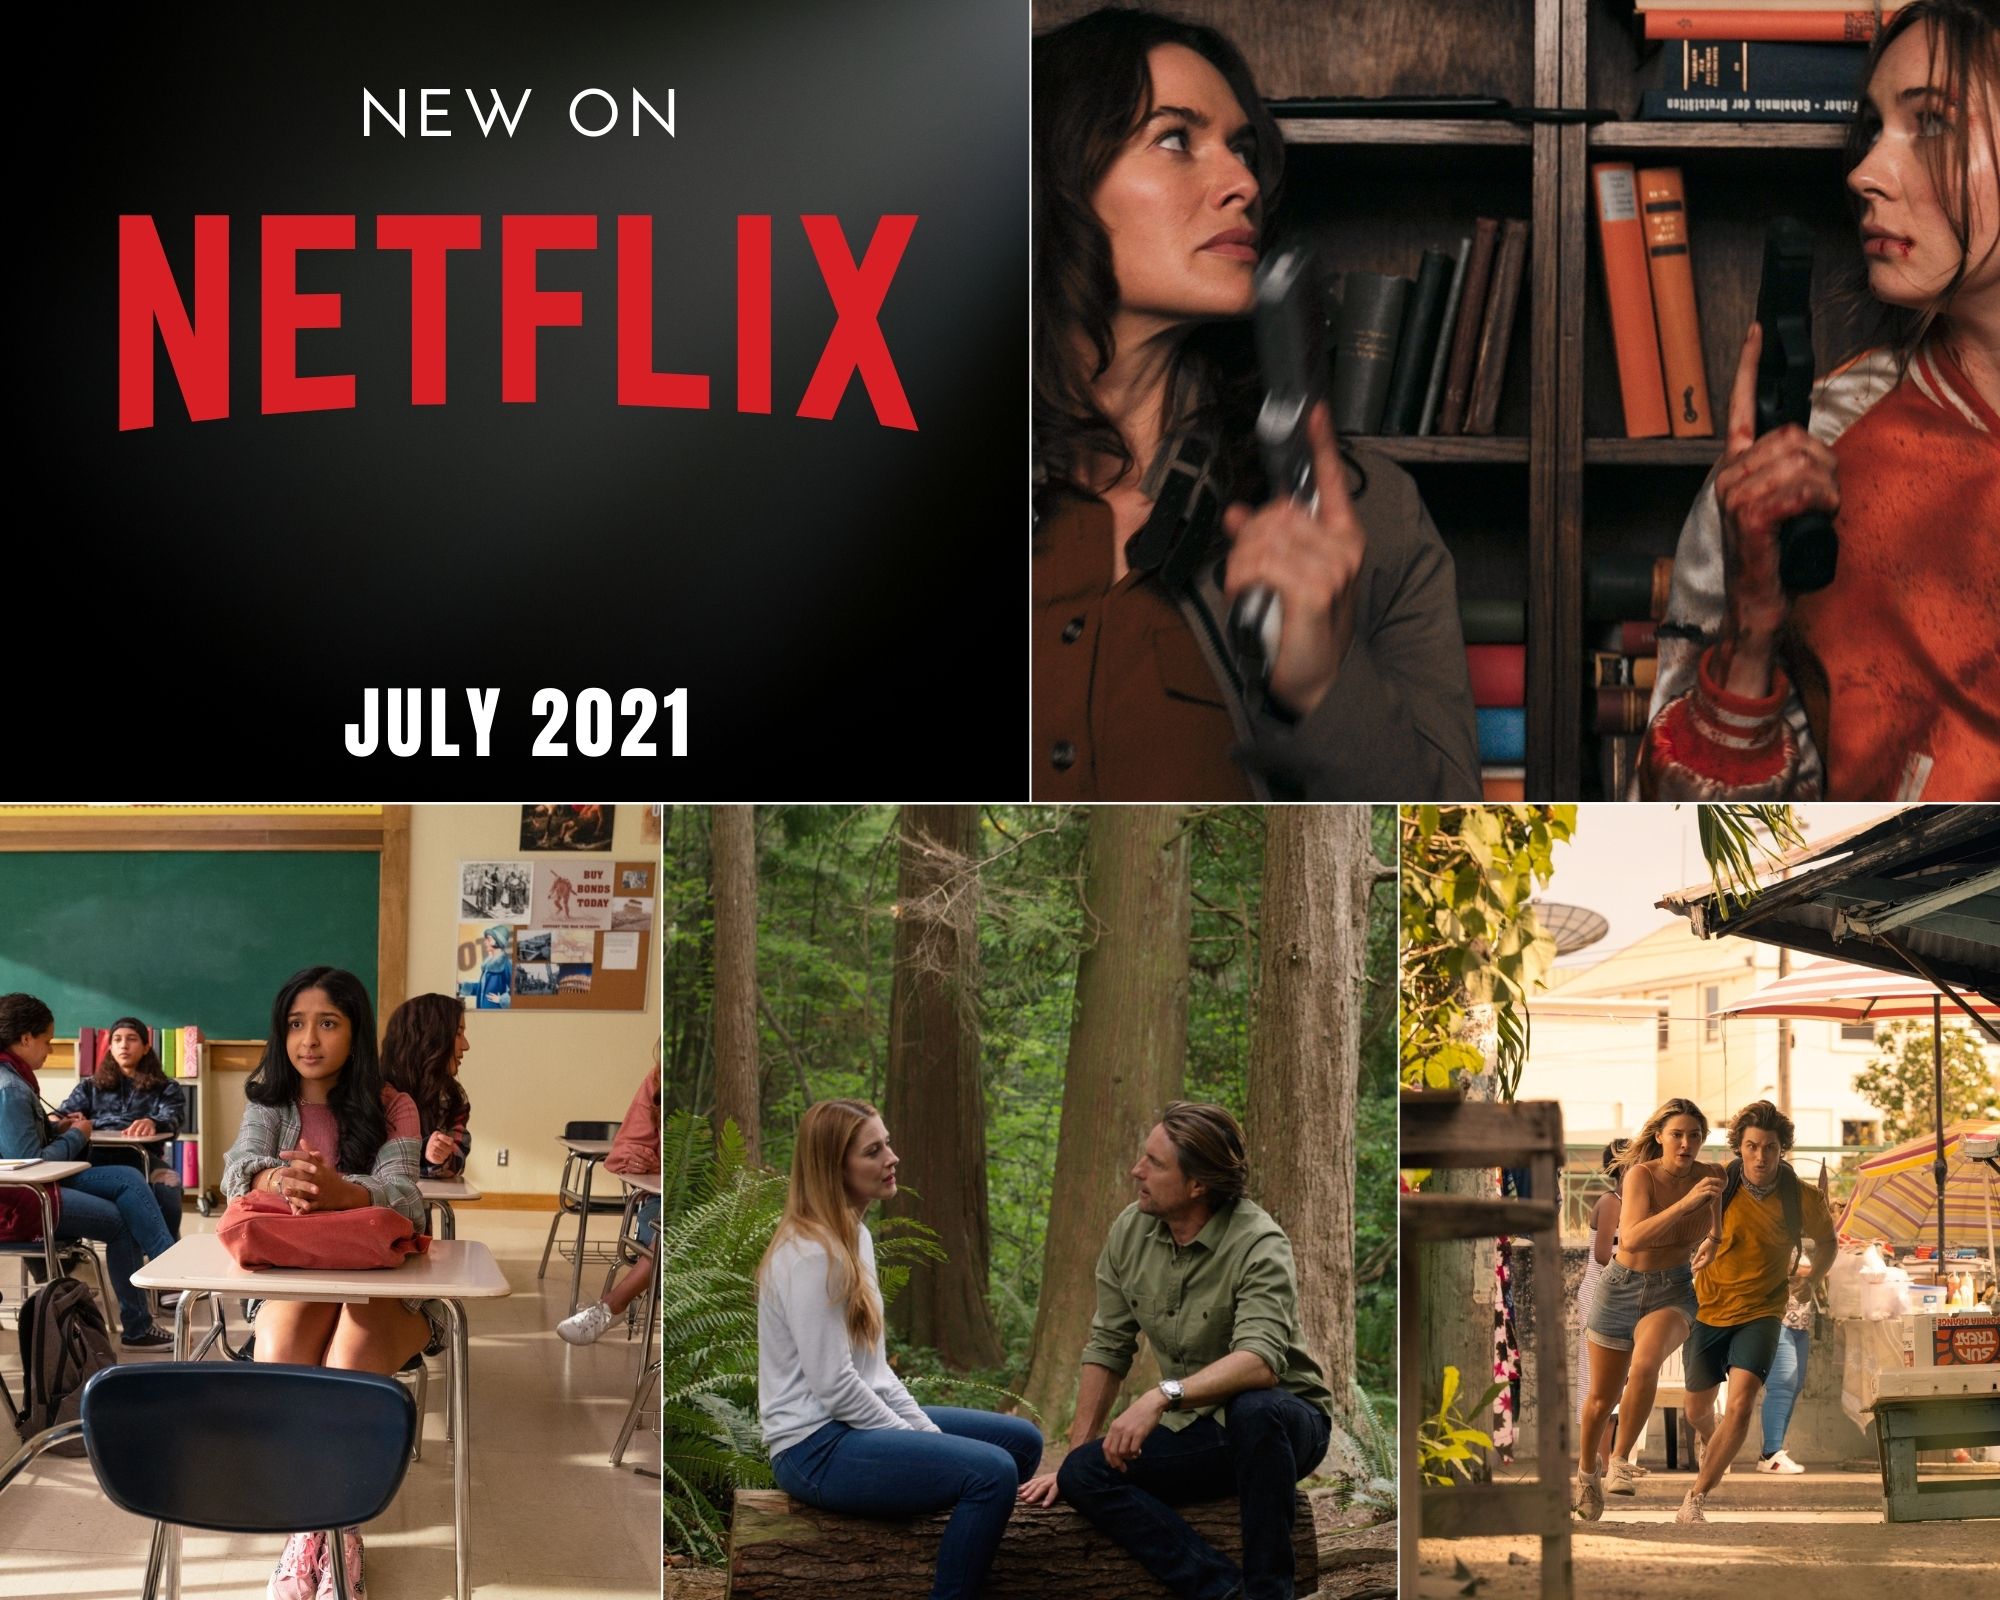 Check out what's coming to Netflix next month July 2021